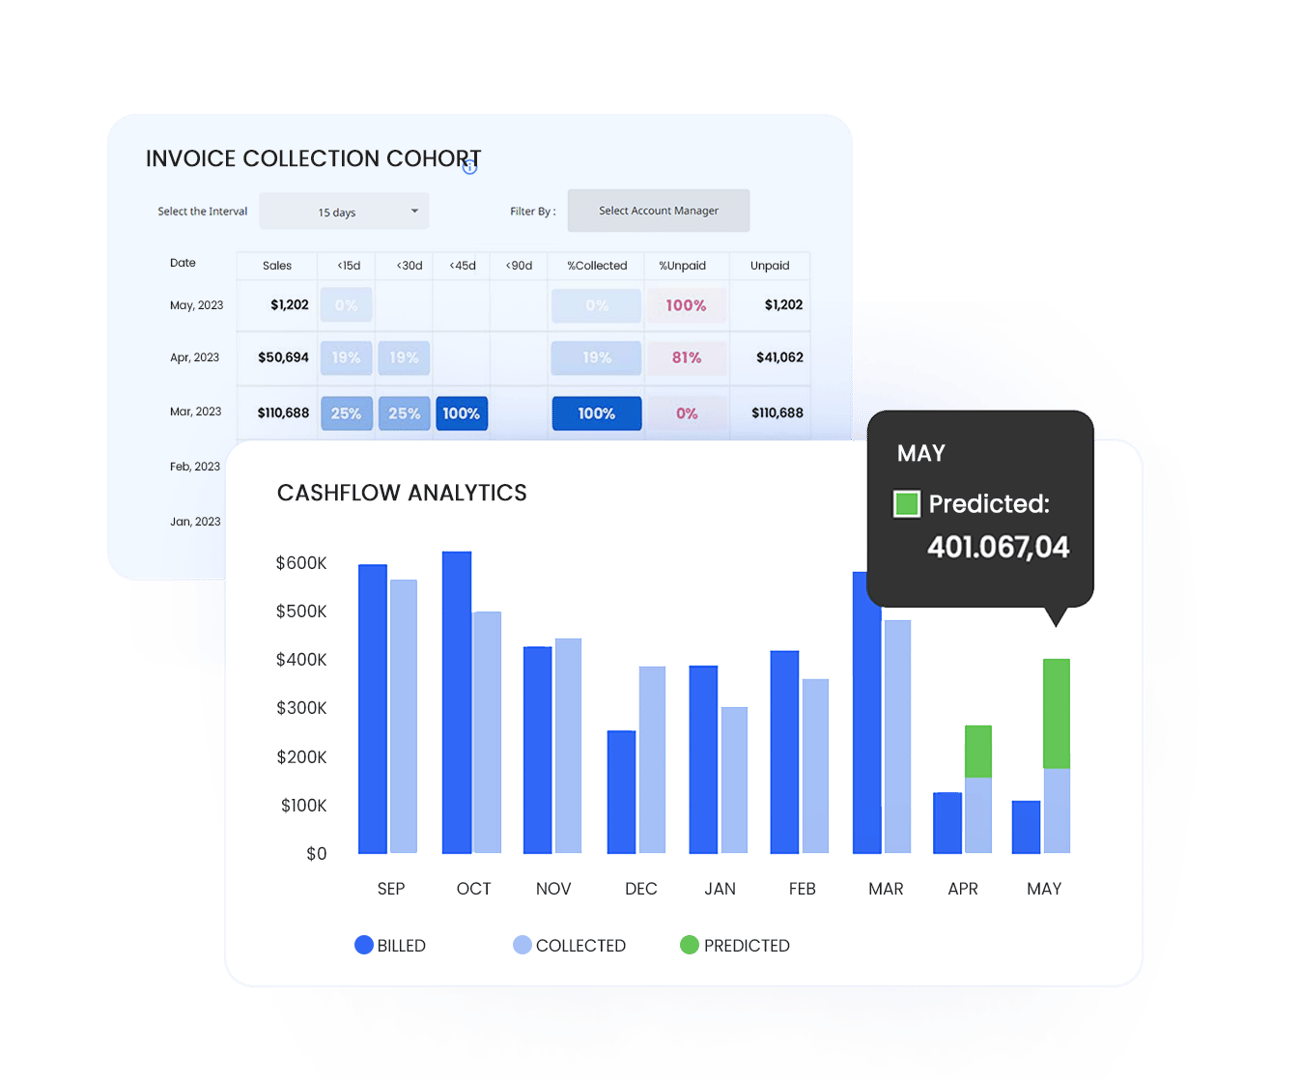 Cashflow analytics is an incredibly powerful report that helps understand the cashflow health of your company through an easy visualization of the total amount billed and collected each month.